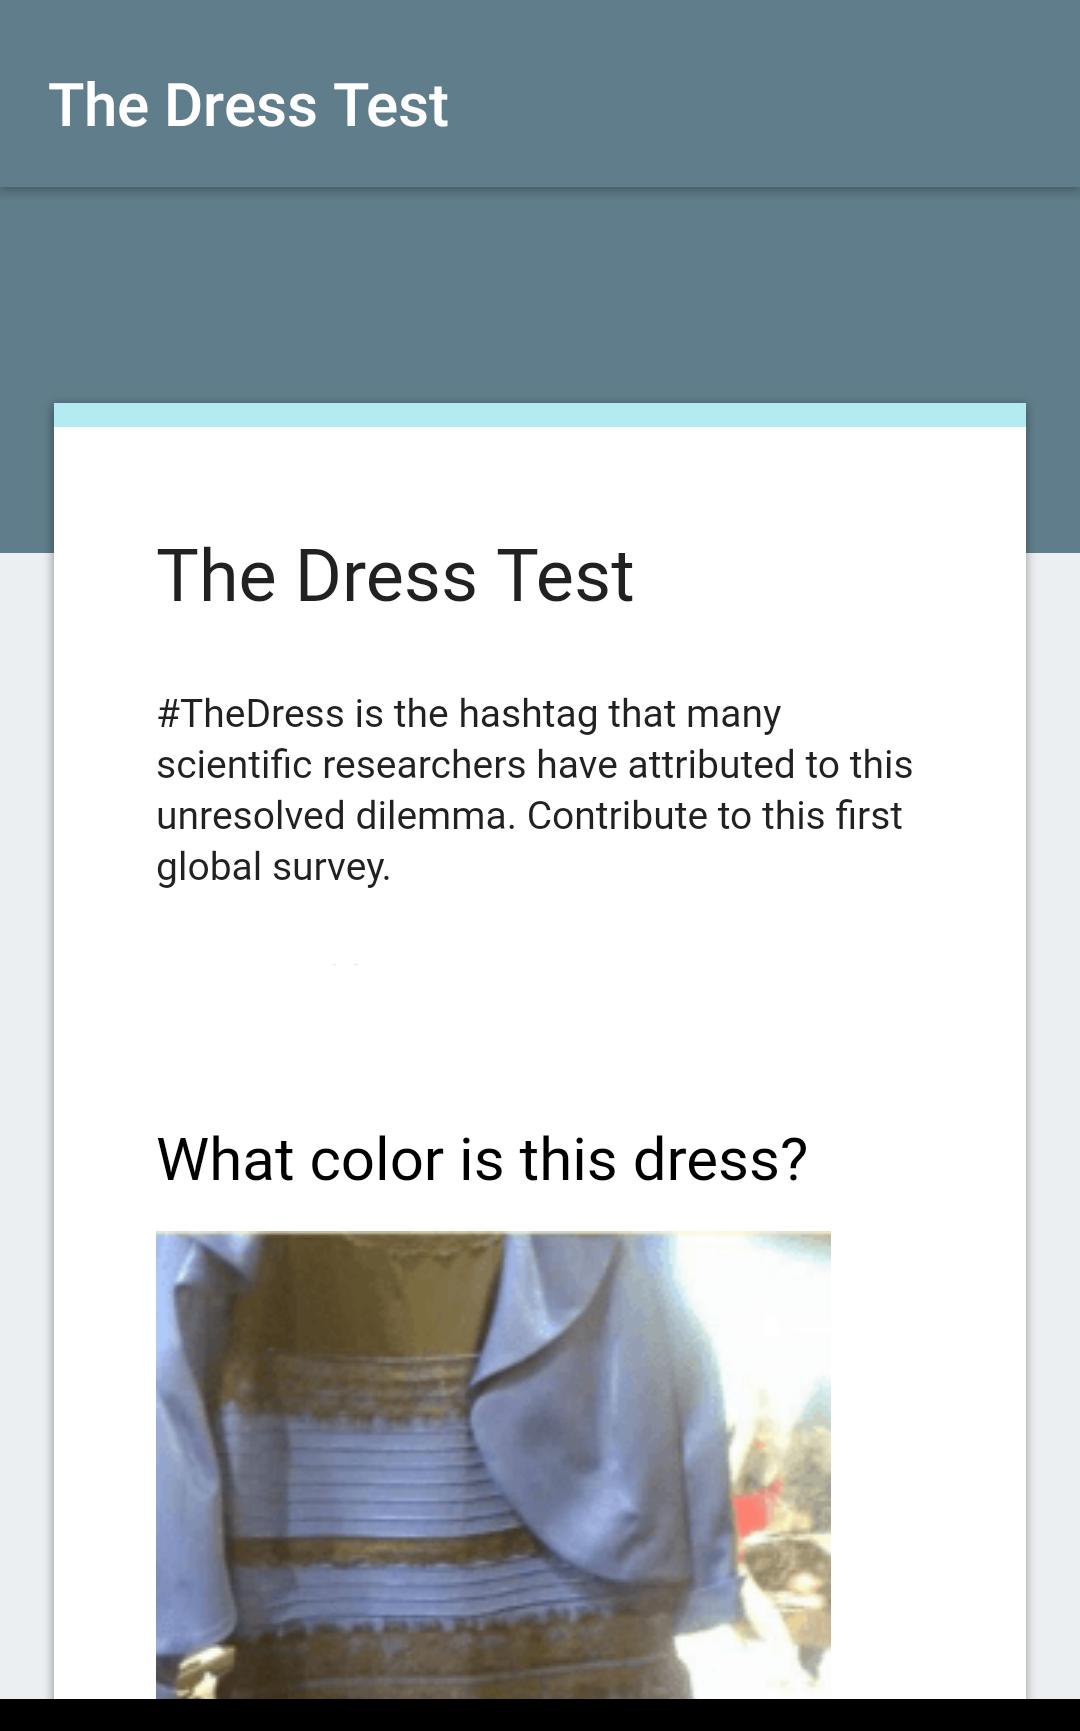 The Dress Test for Android - APK Download